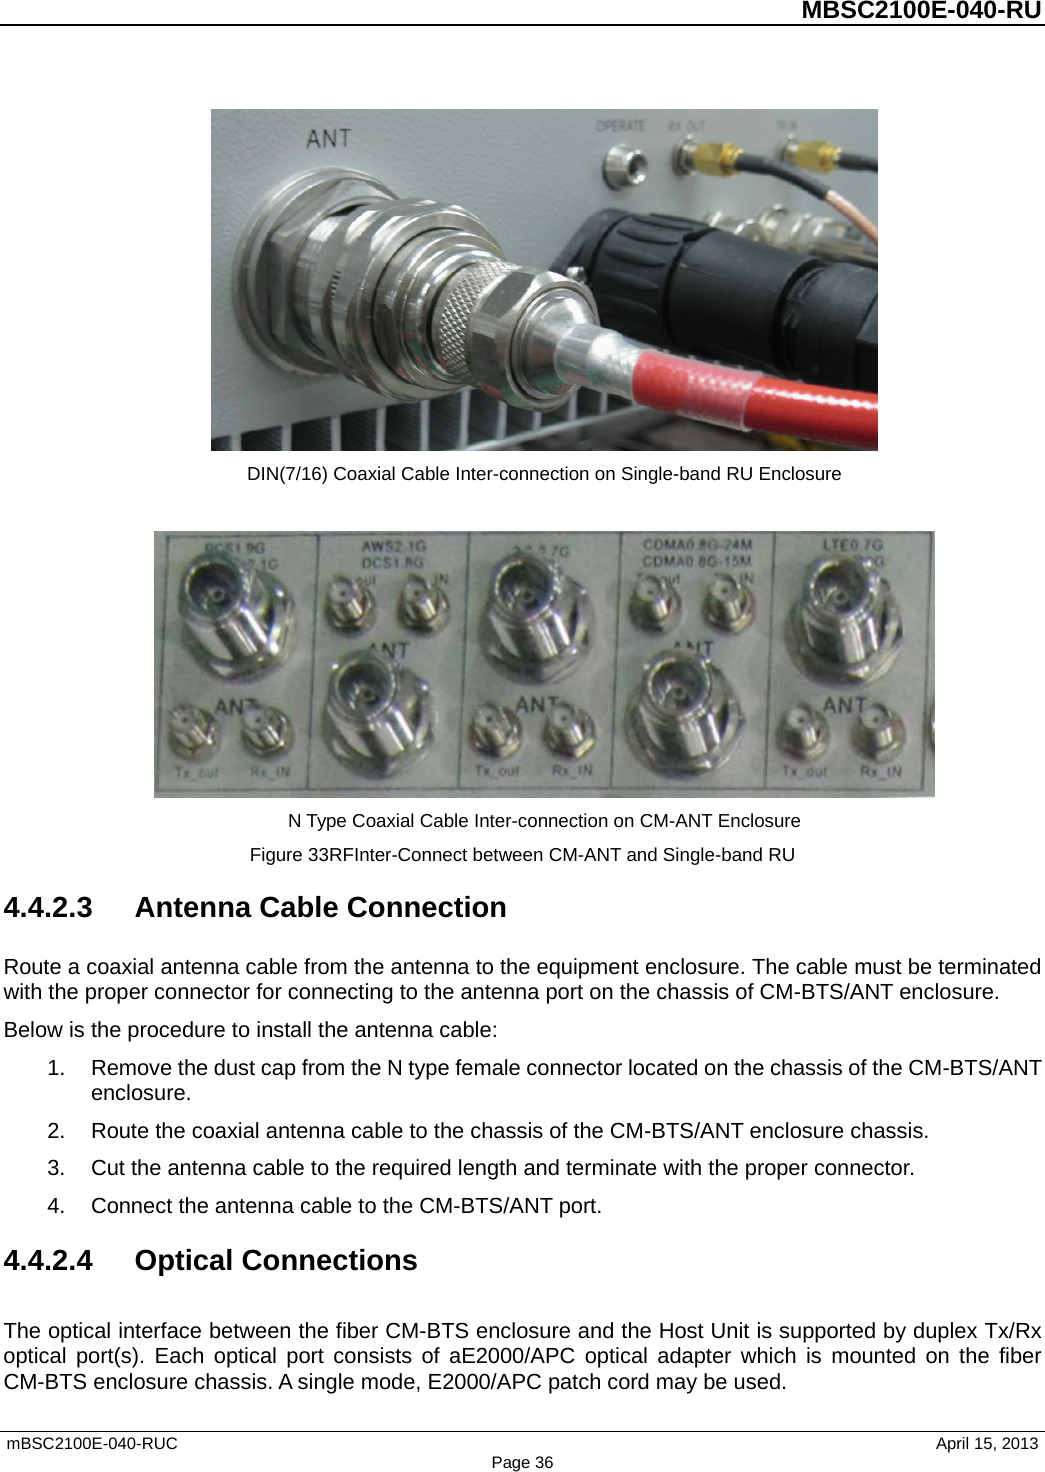          MBSC2100E-040-RU   mBSC2100E-040-RUC                                     April 15, 2013 Page 36  DIN(7/16) Coaxial Cable Inter-connection on Single-band RU Enclosure   N Type Coaxial Cable Inter-connection on CM-ANT Enclosure Figure 33RFInter-Connect between CM-ANT and Single-band RU 4.4.2.3 Antenna Cable Connection Route a coaxial antenna cable from the antenna to the equipment enclosure. The cable must be terminated with the proper connector for connecting to the antenna port on the chassis of CM-BTS/ANT enclosure. Below is the procedure to install the antenna cable: 1. Remove the dust cap from the N type female connector located on the chassis of the CM-BTS/ANT enclosure. 2. Route the coaxial antenna cable to the chassis of the CM-BTS/ANT enclosure chassis. 3. Cut the antenna cable to the required length and terminate with the proper connector. 4. Connect the antenna cable to the CM-BTS/ANT port. 4.4.2.4  Optical Connections The optical interface between the fiber CM-BTS enclosure and the Host Unit is supported by duplex Tx/Rx optical port(s). Each optical port consists of aE2000/APC optical adapter which is mounted on the fiber CM-BTS enclosure chassis. A single mode, E2000/APC patch cord may be used. 